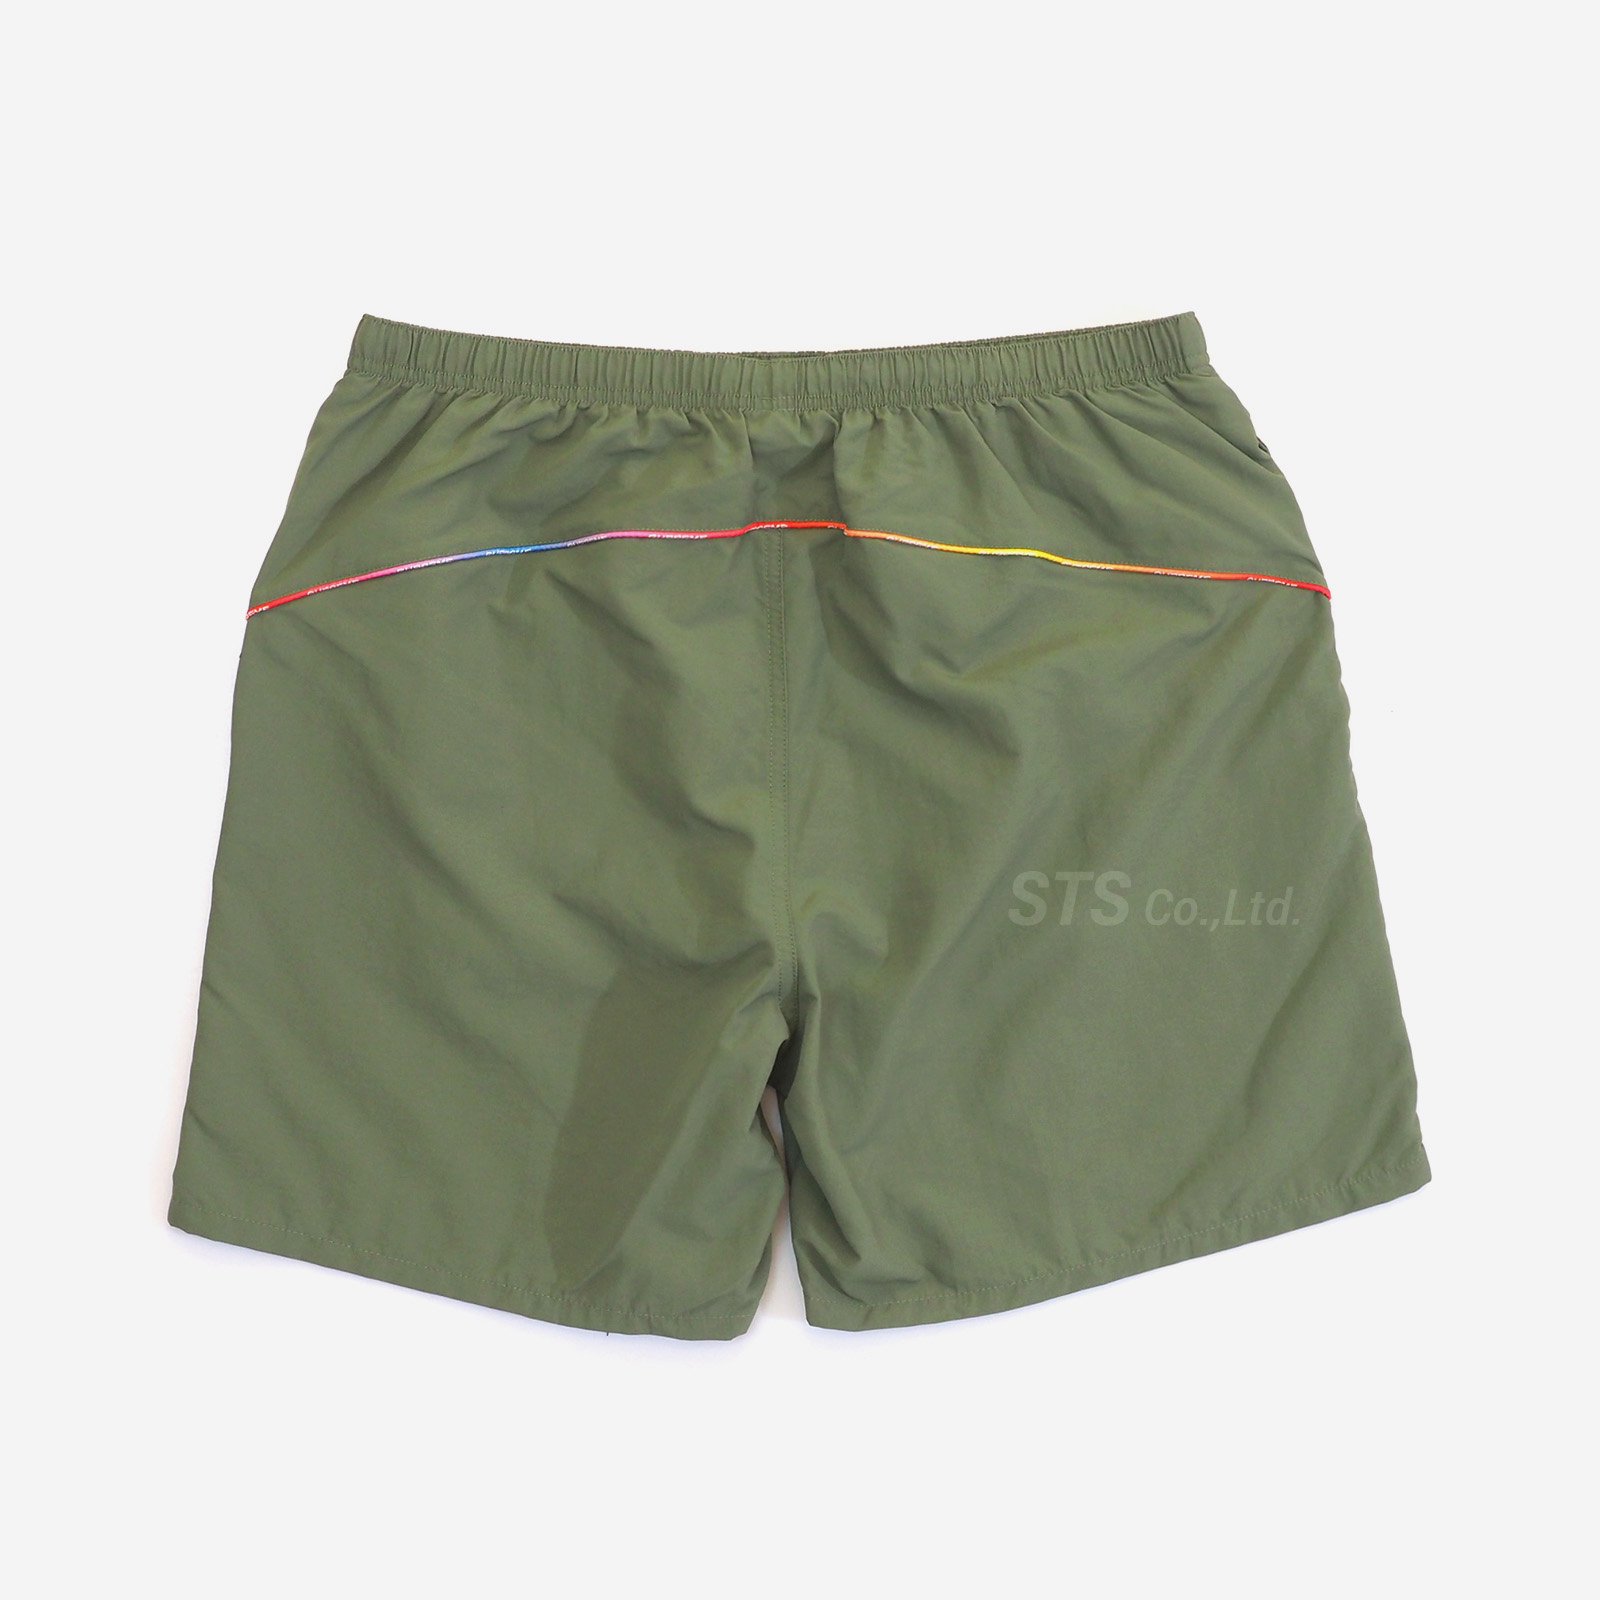 Supreme - Gradient Piping Water Short - ParkSIDER